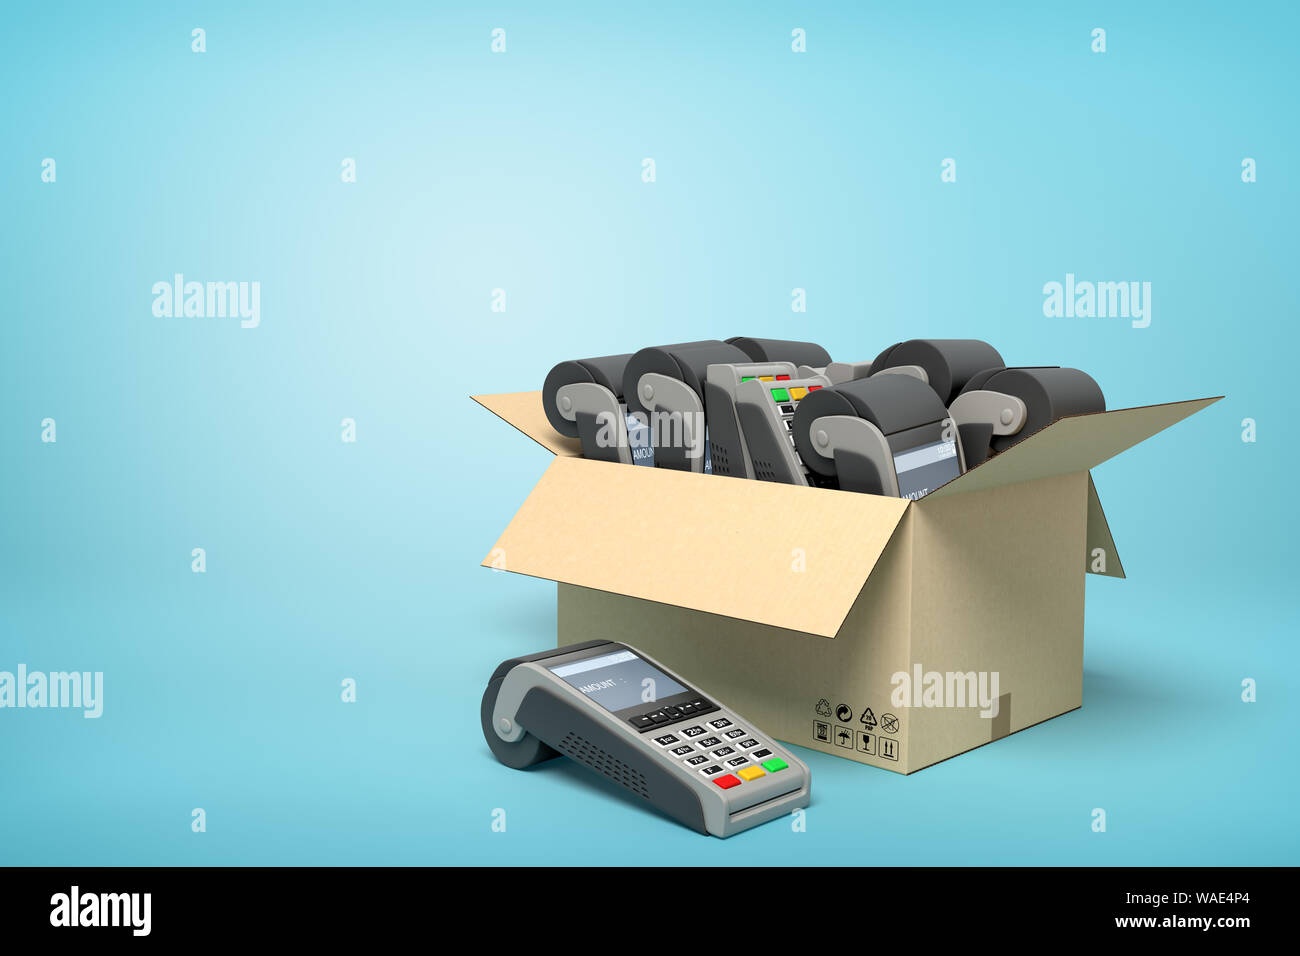 3d rendering of cardboard box full of several point-of-sale terminals on blue background. Store equipment. Retail commerce. Making transactions. Stock Photo